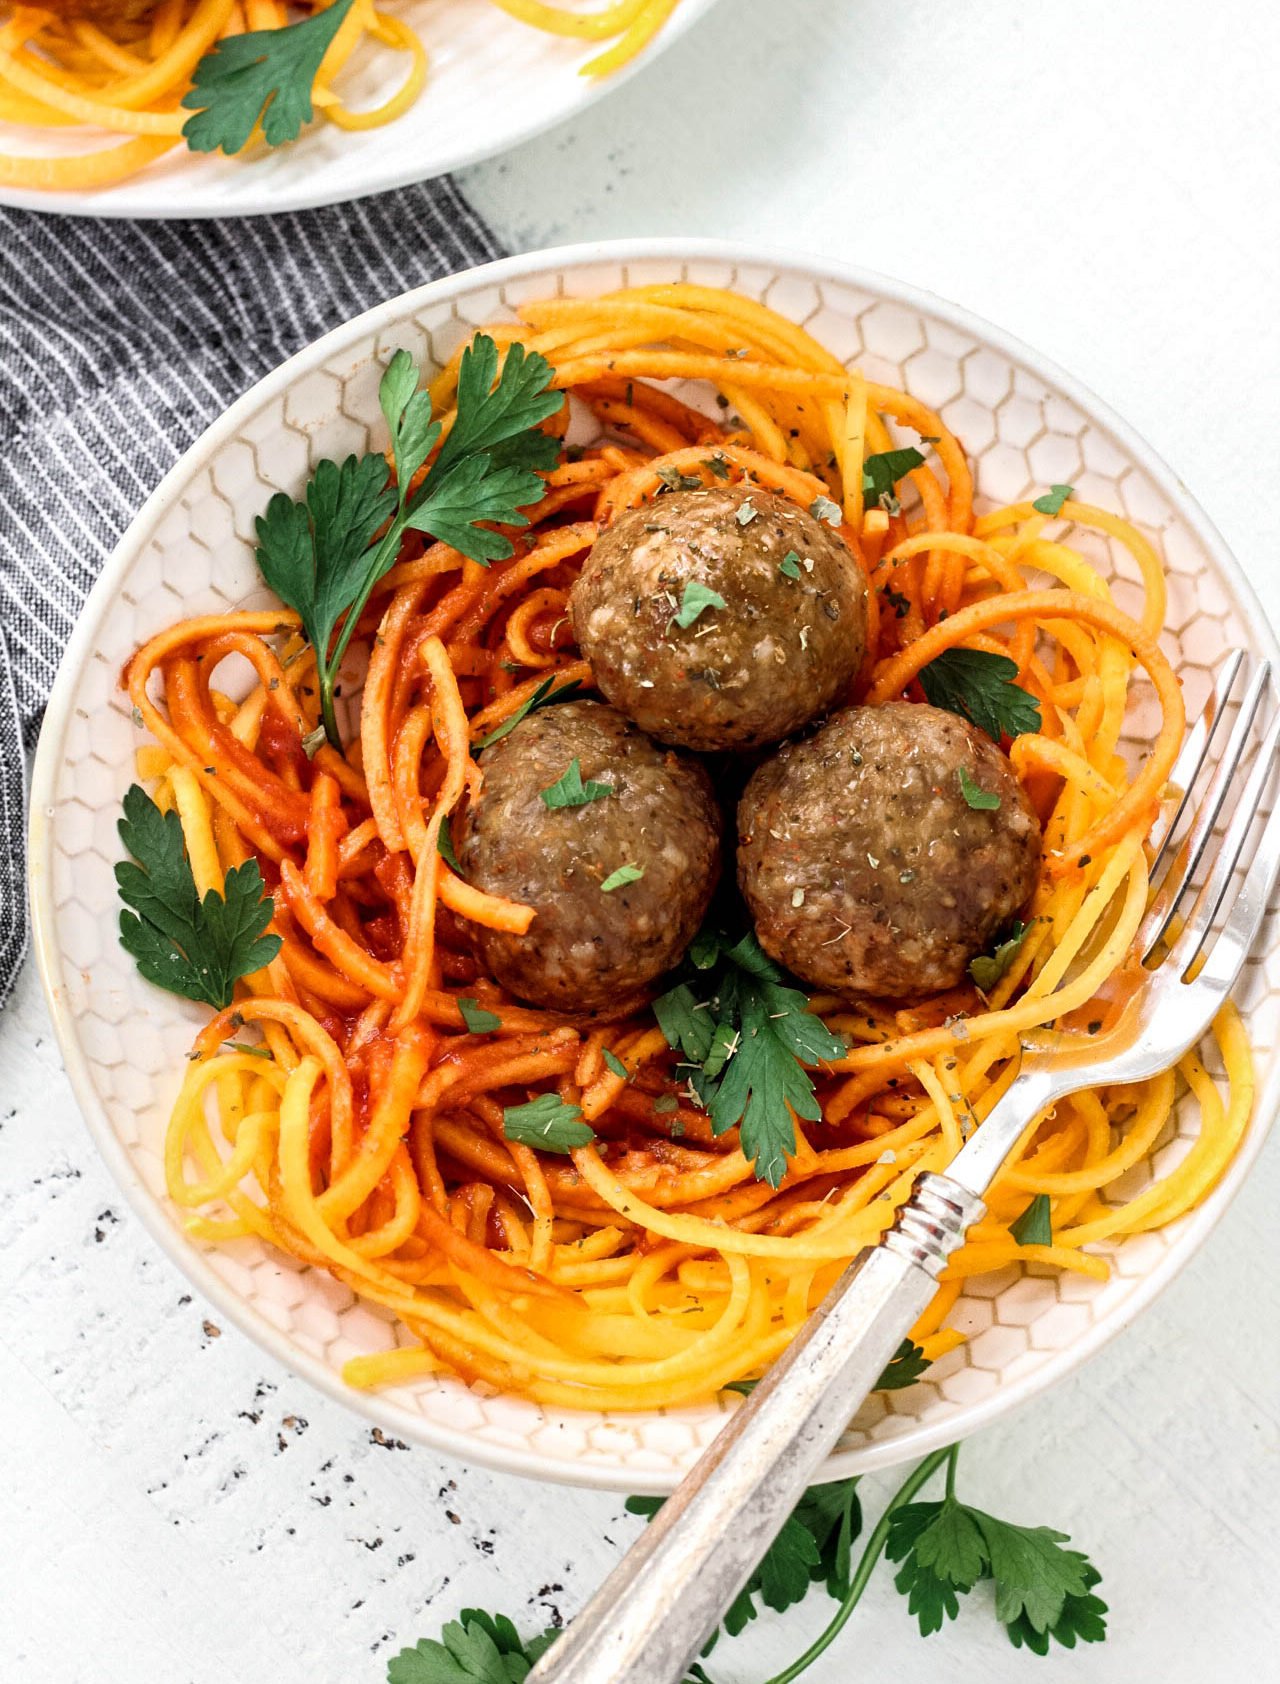 This easy meatball recipe is tried and true and the best way to make meatballs! Made paleo and Whole30 but still every bit as juicy and delicious. Served over butternut squash noodles and marinara here, the ways you can enjoy this low carb meatball recipe is endless!